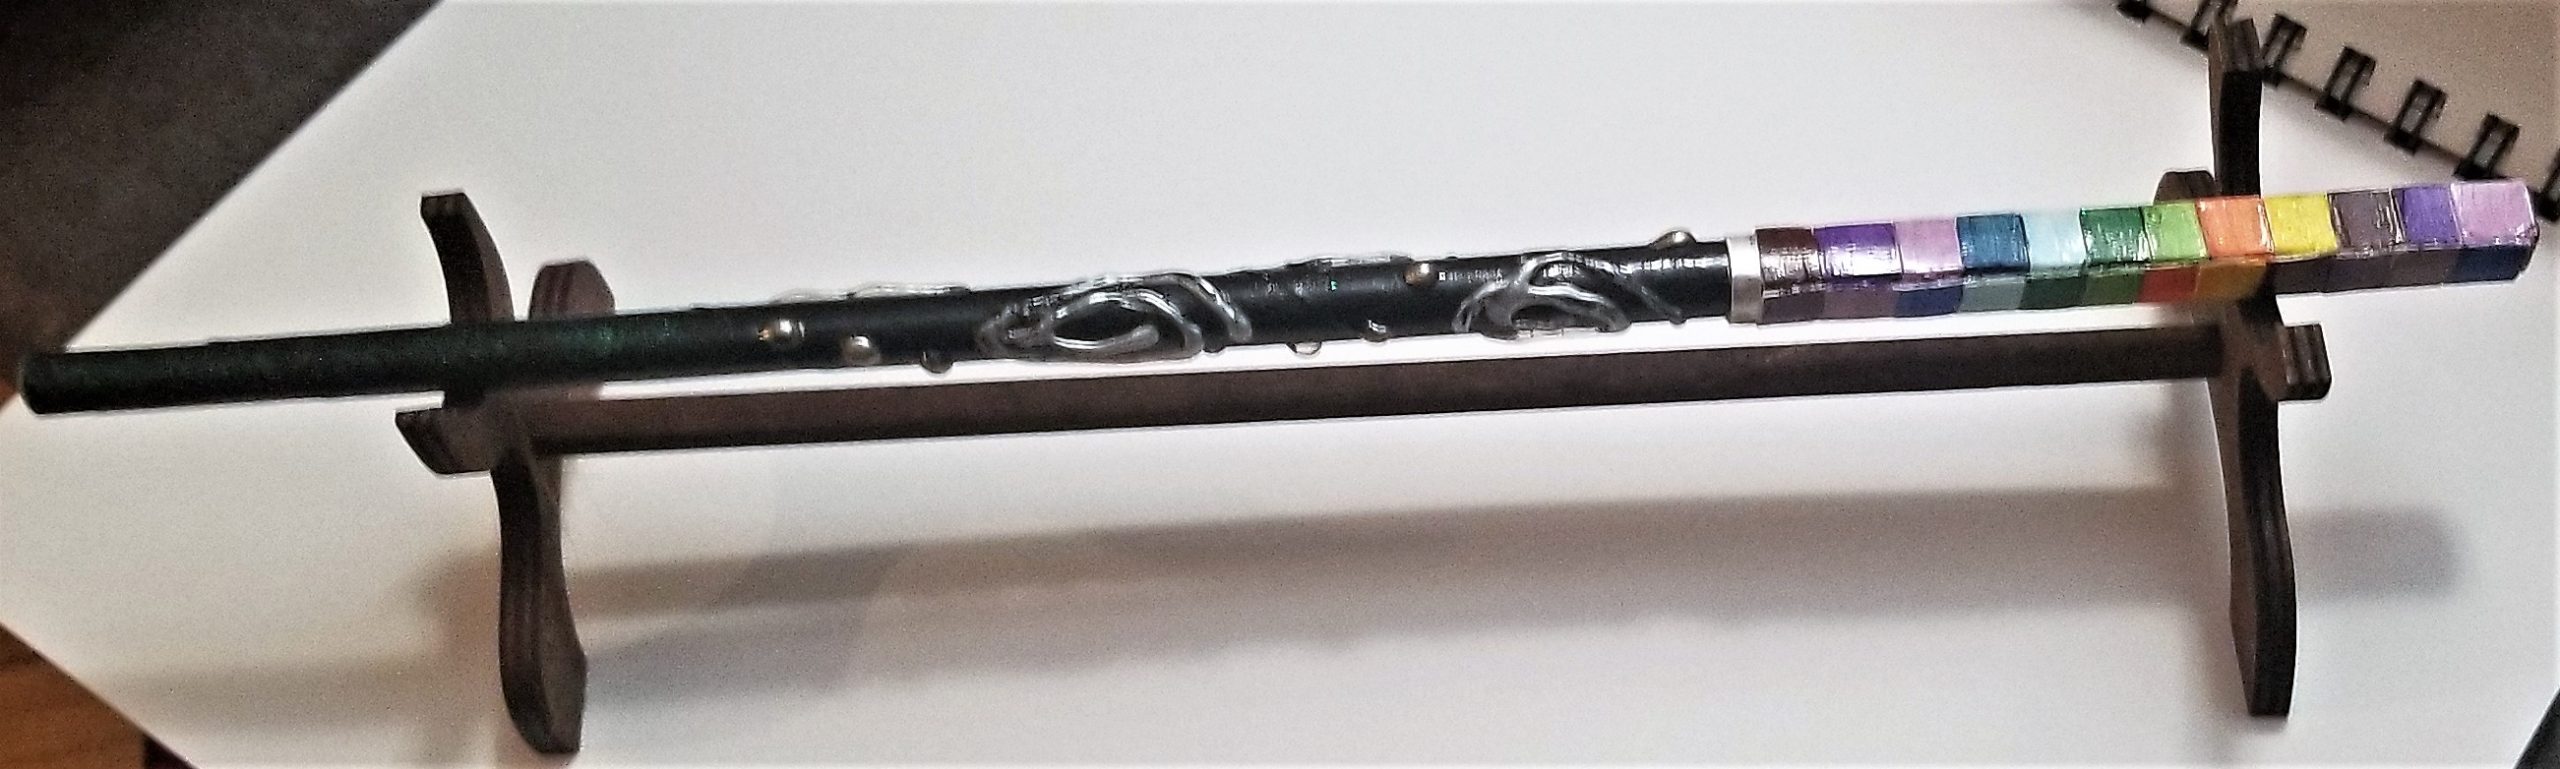 A black wand with swirls and dots of silver. The handle is has squares of several colors in a repeating pattern.